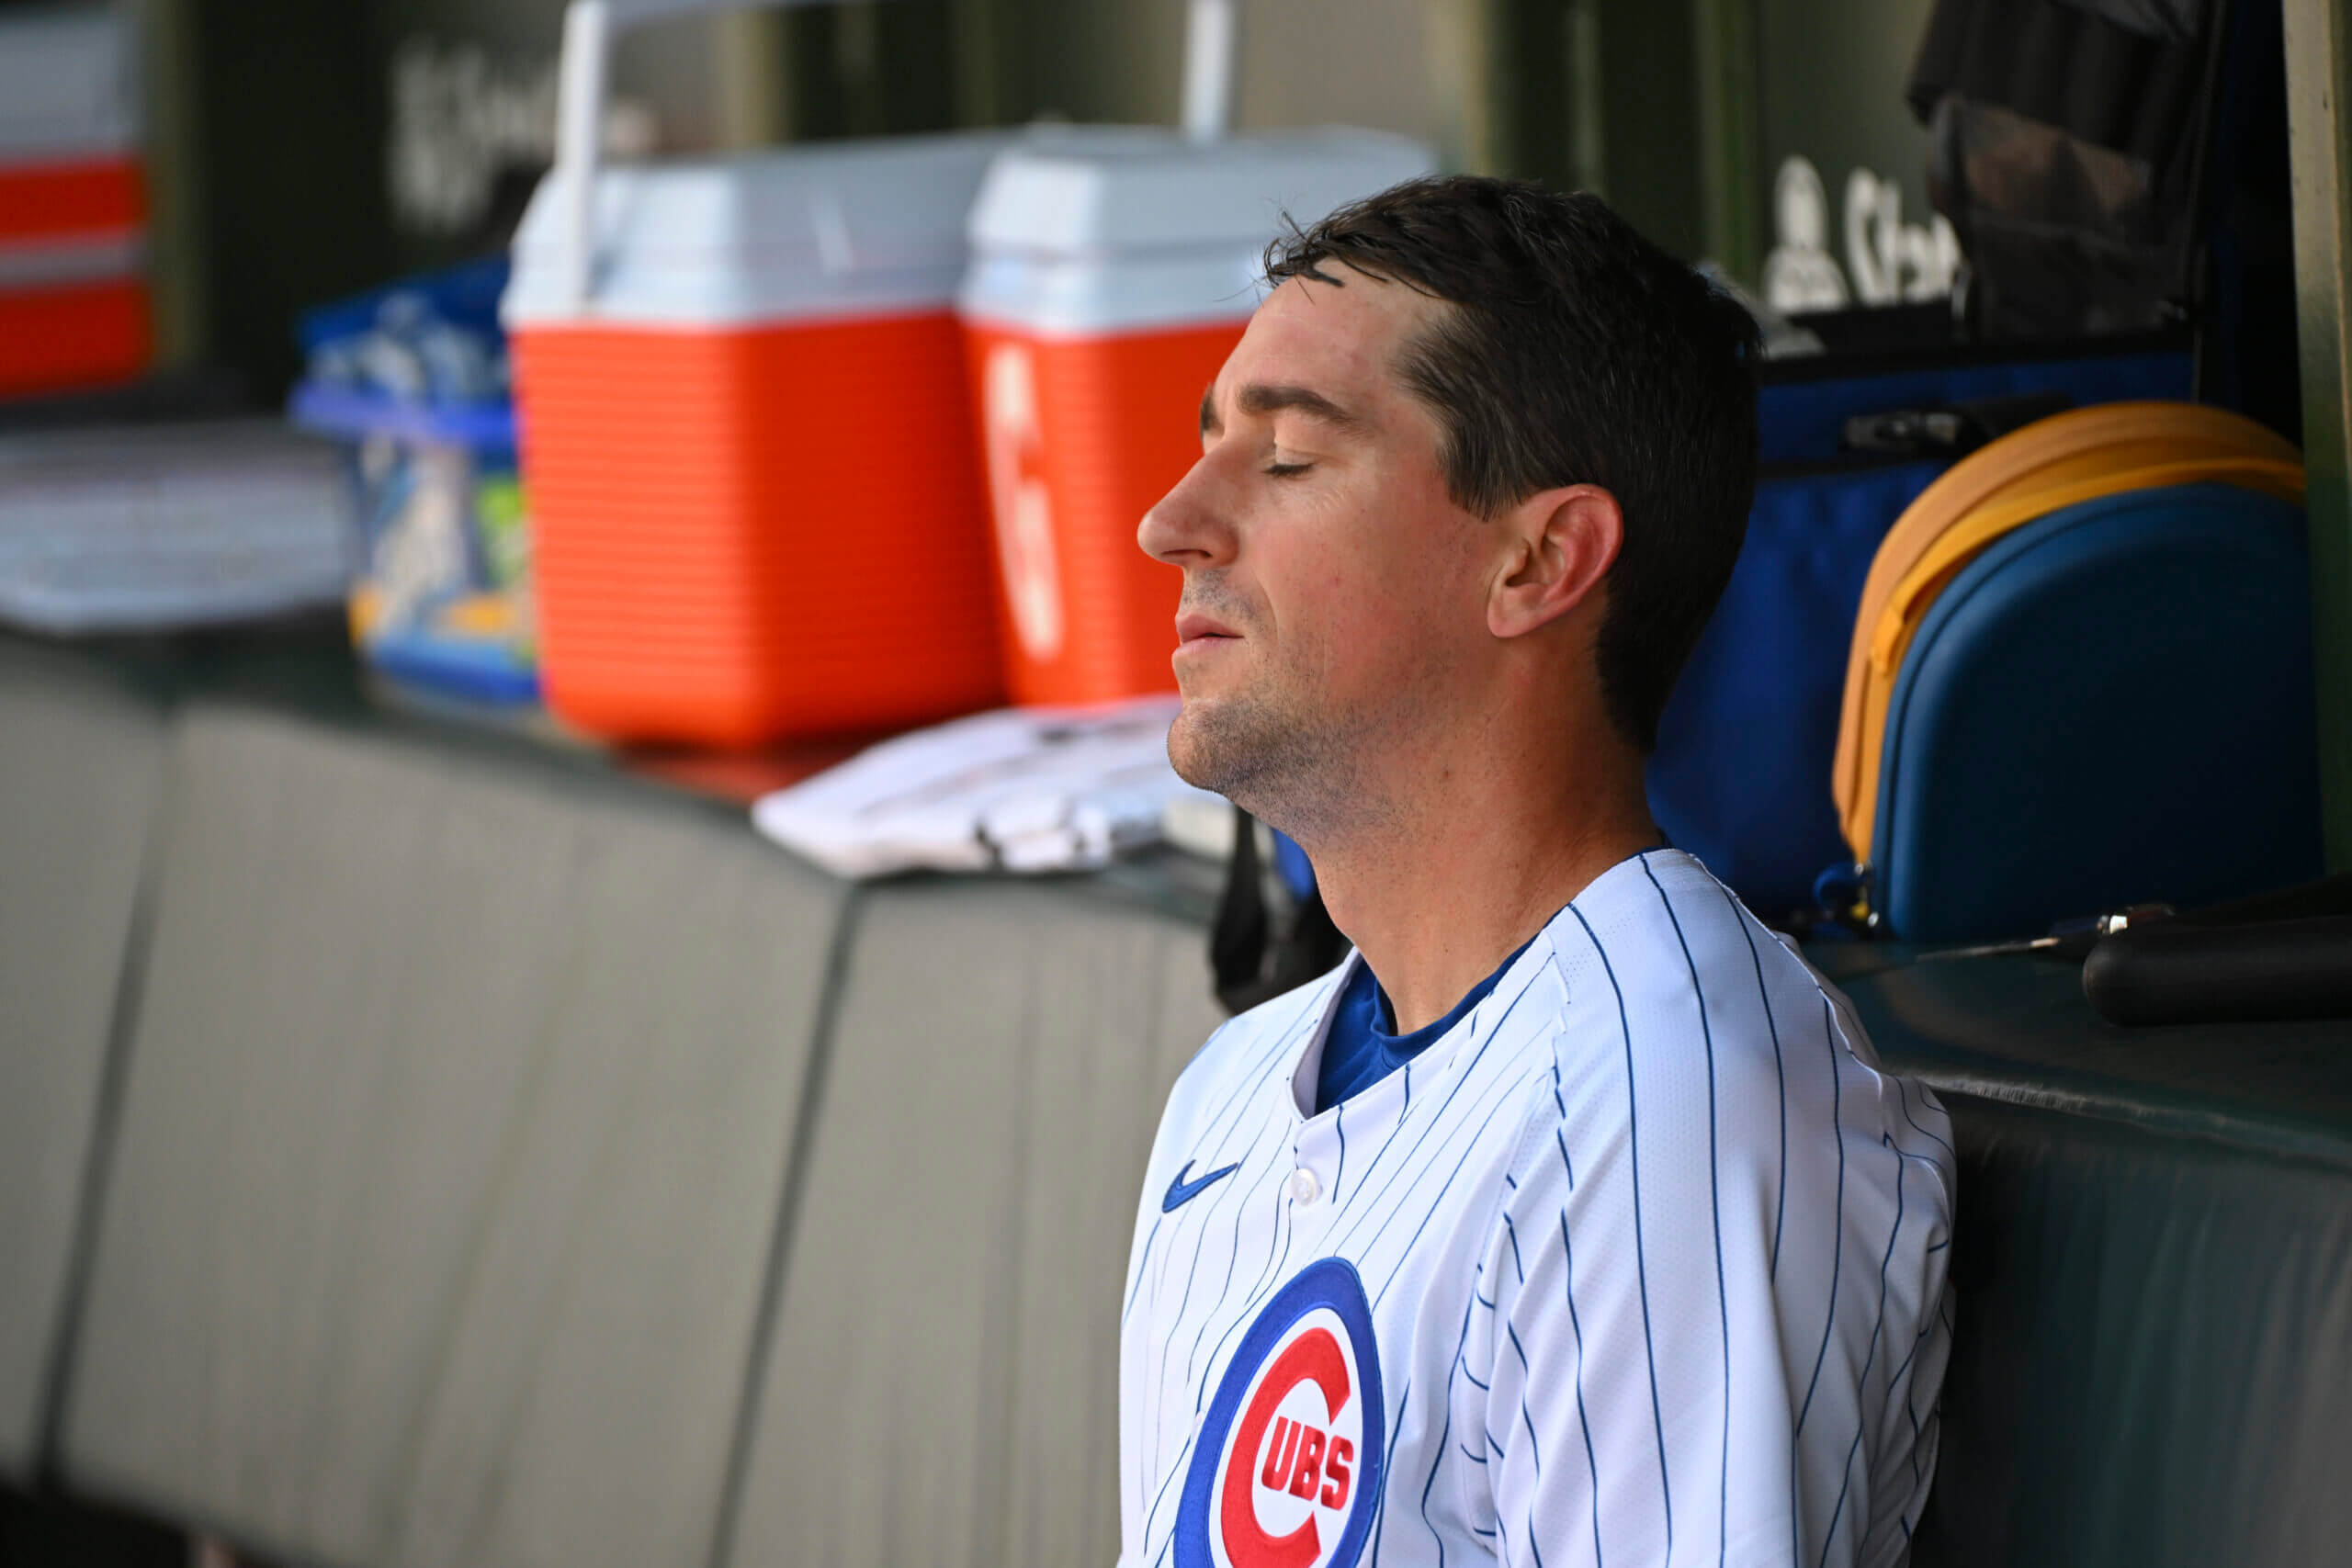 Craig Counsell’s patience is running low after another rough start from Kyle Hendricks